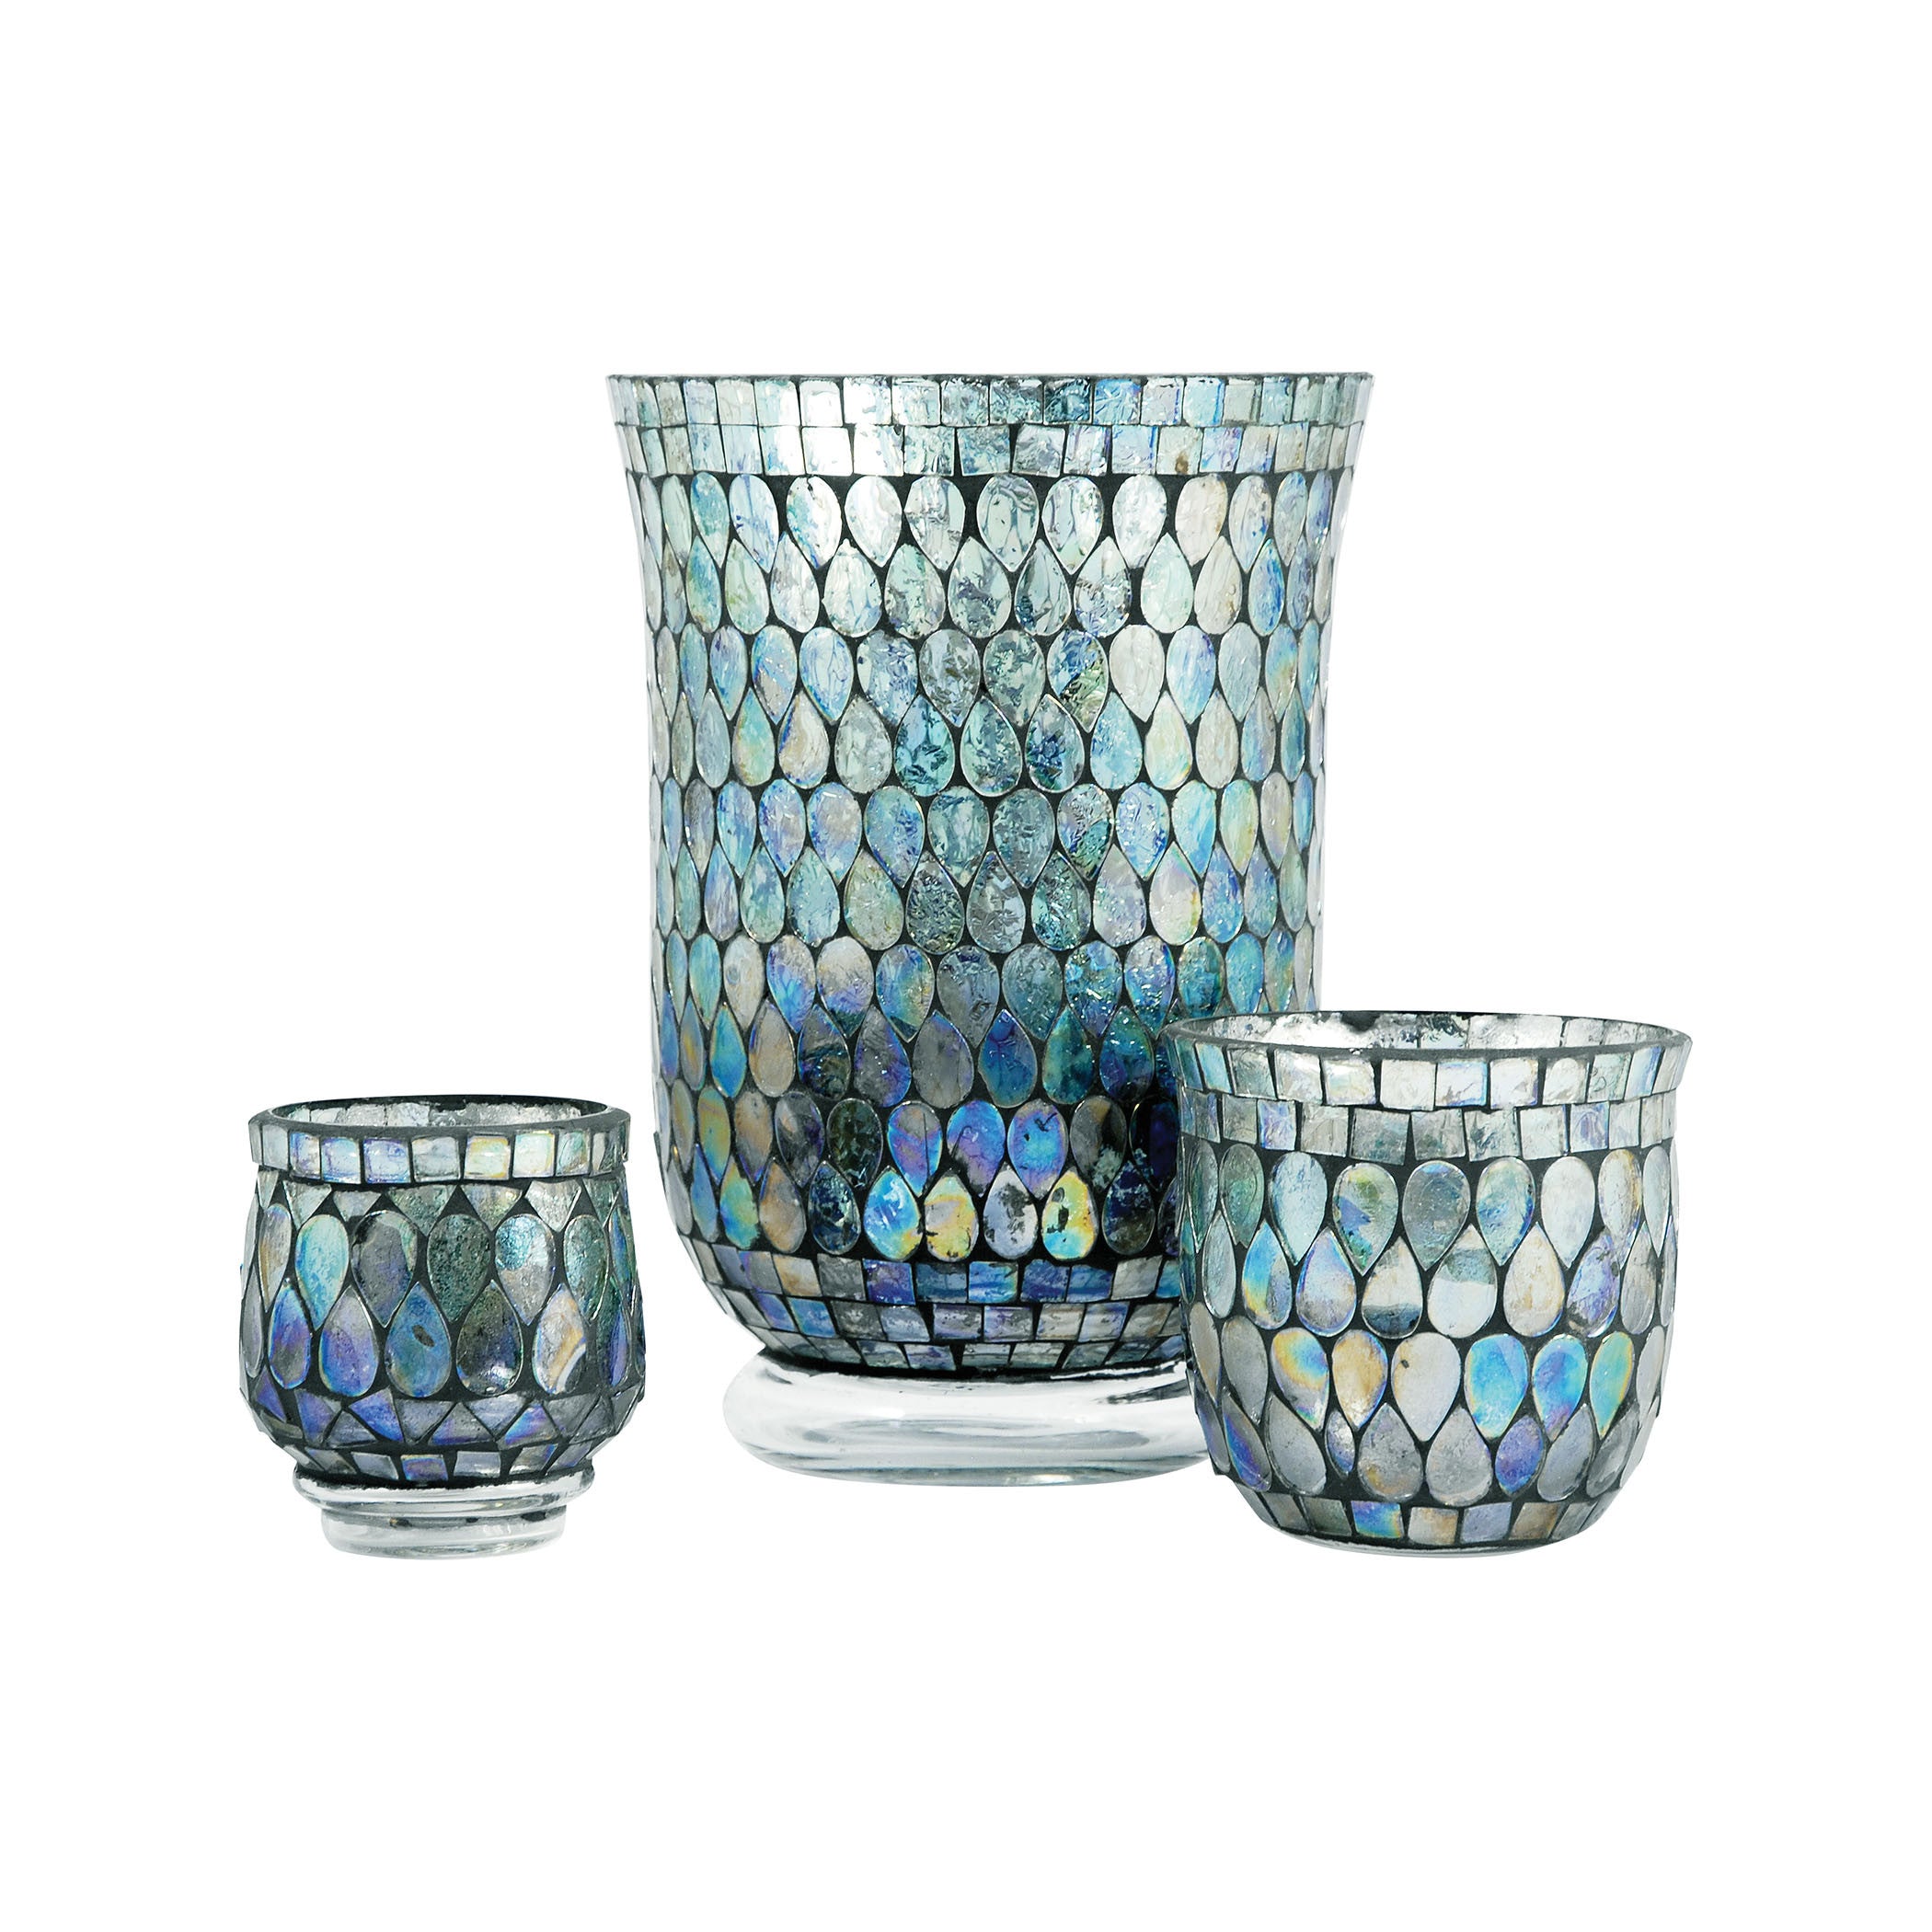 Pomeroy Pom-439421 Ambia Collection Aqua Shimmer Mosaic Finish Candle/candle Holder